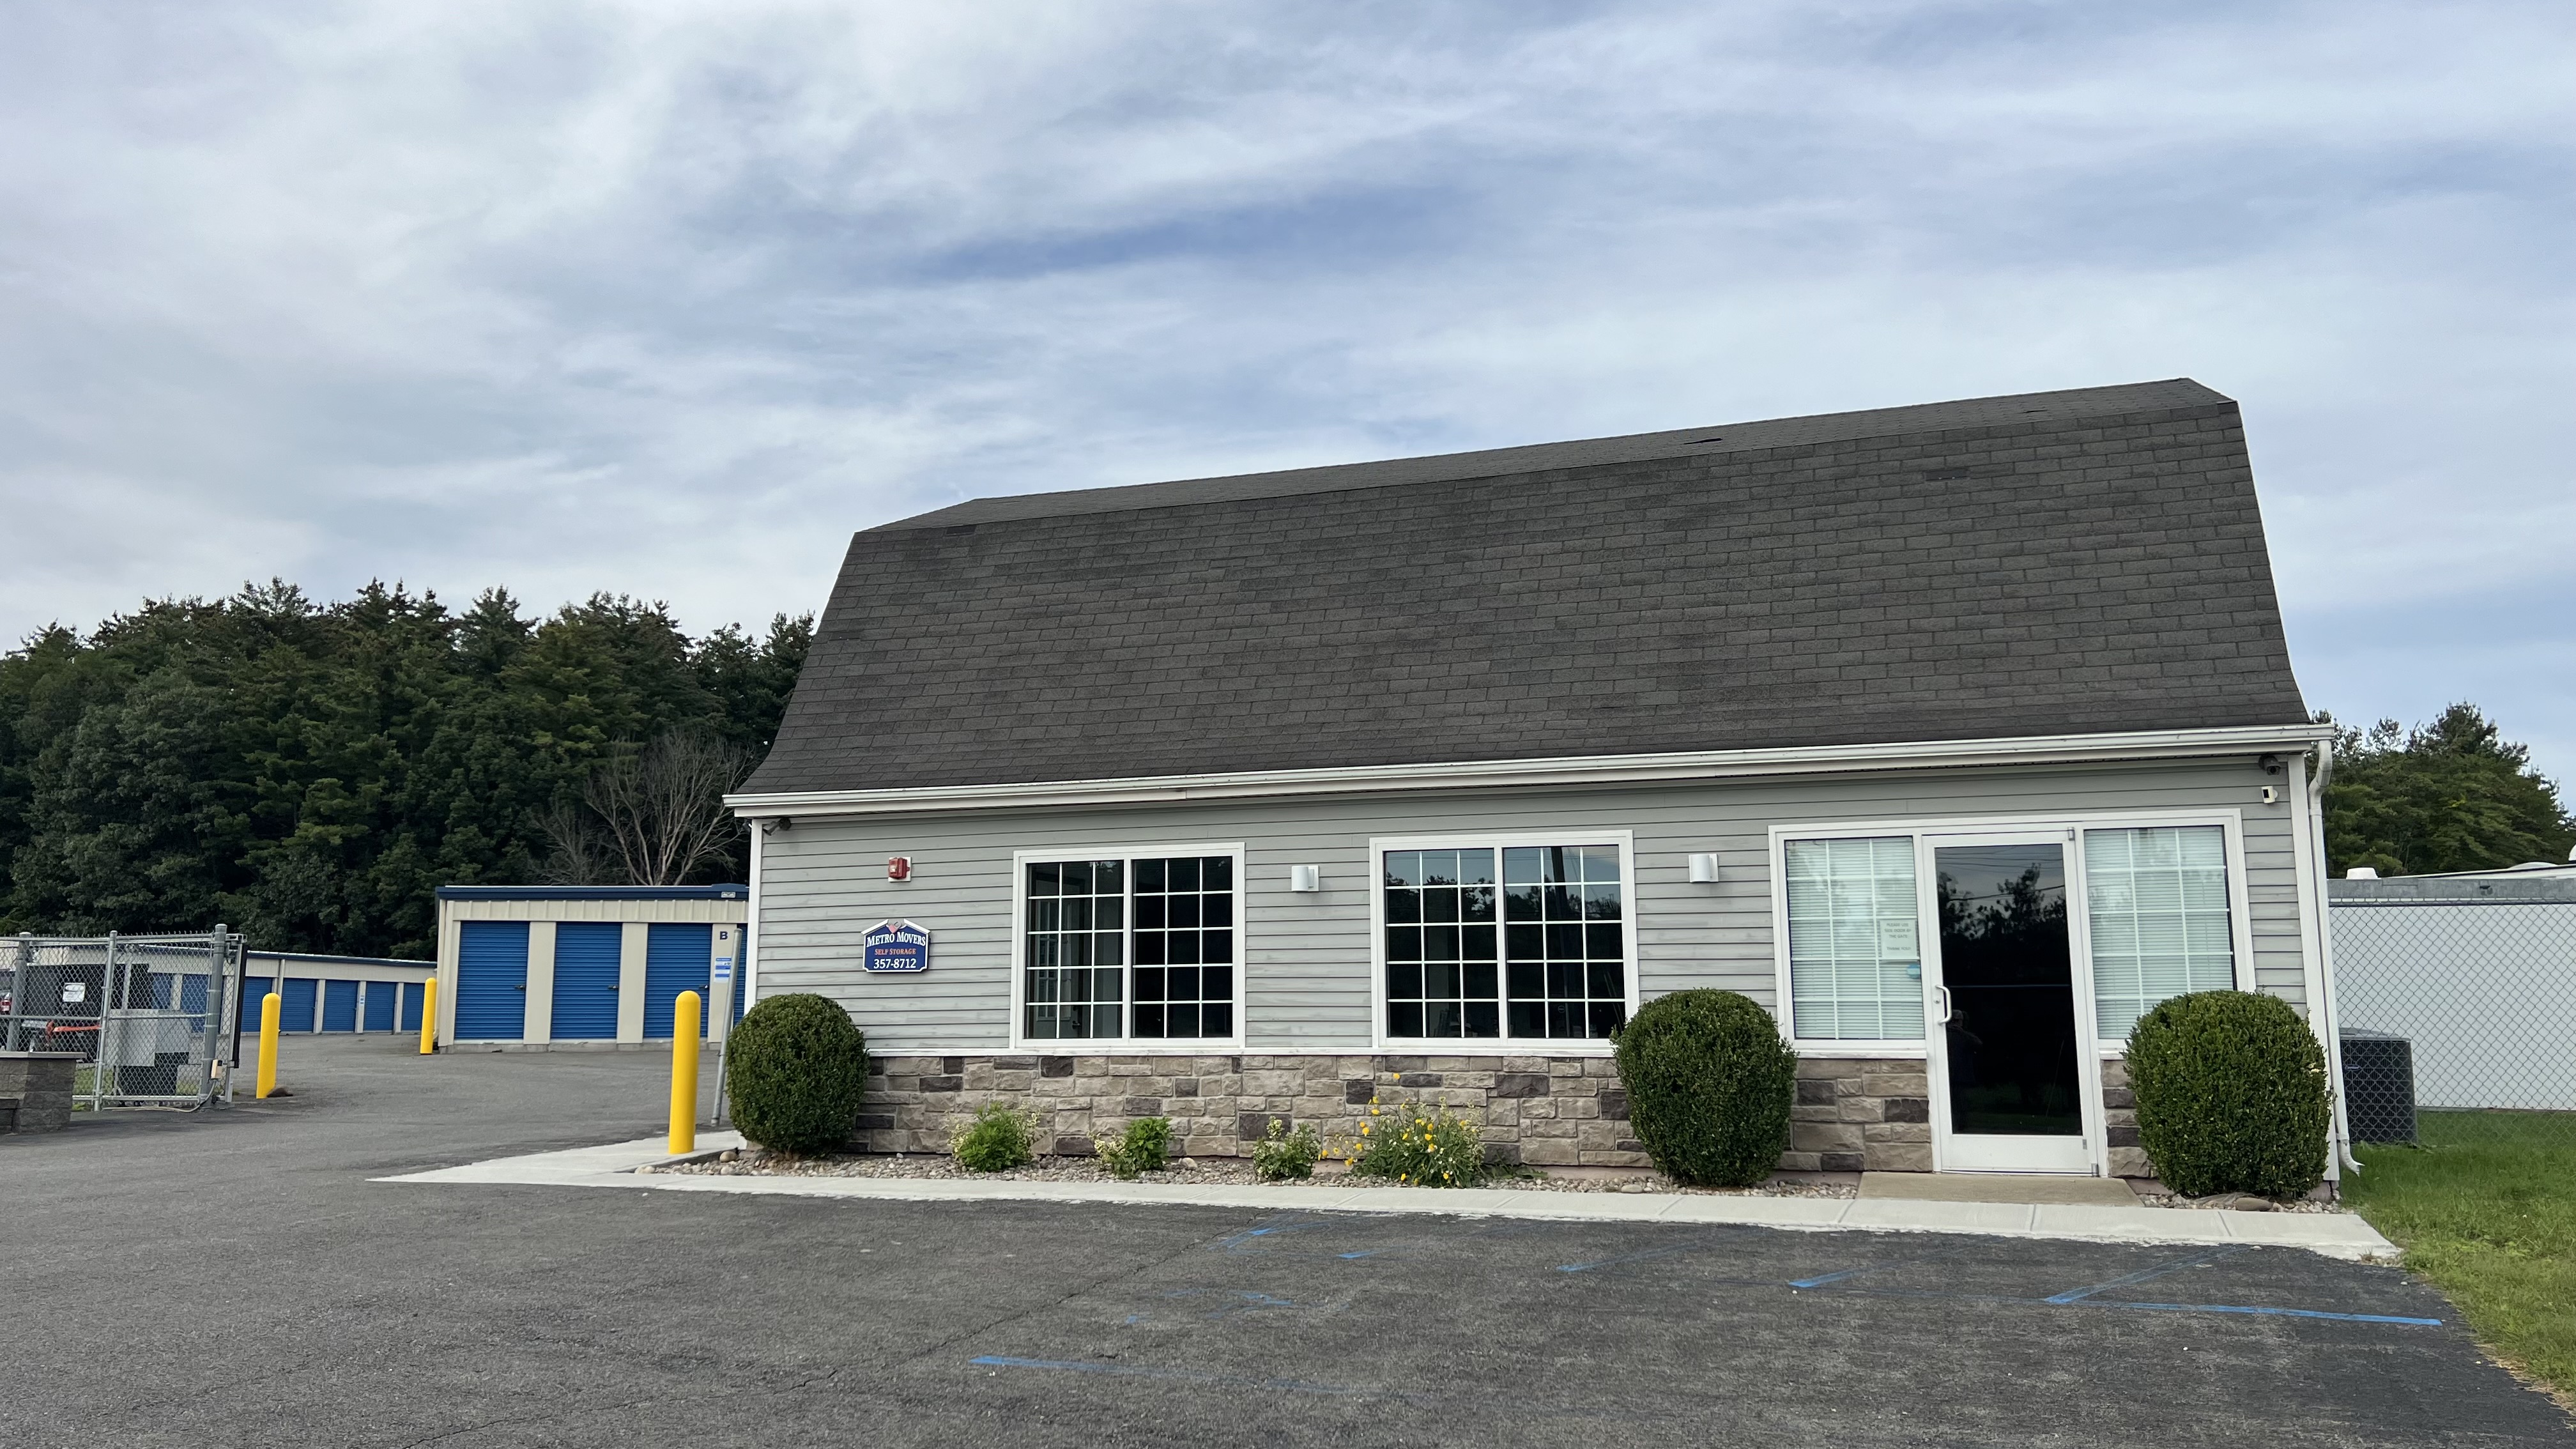 Storage Units in Altamont and Guilderland, NY